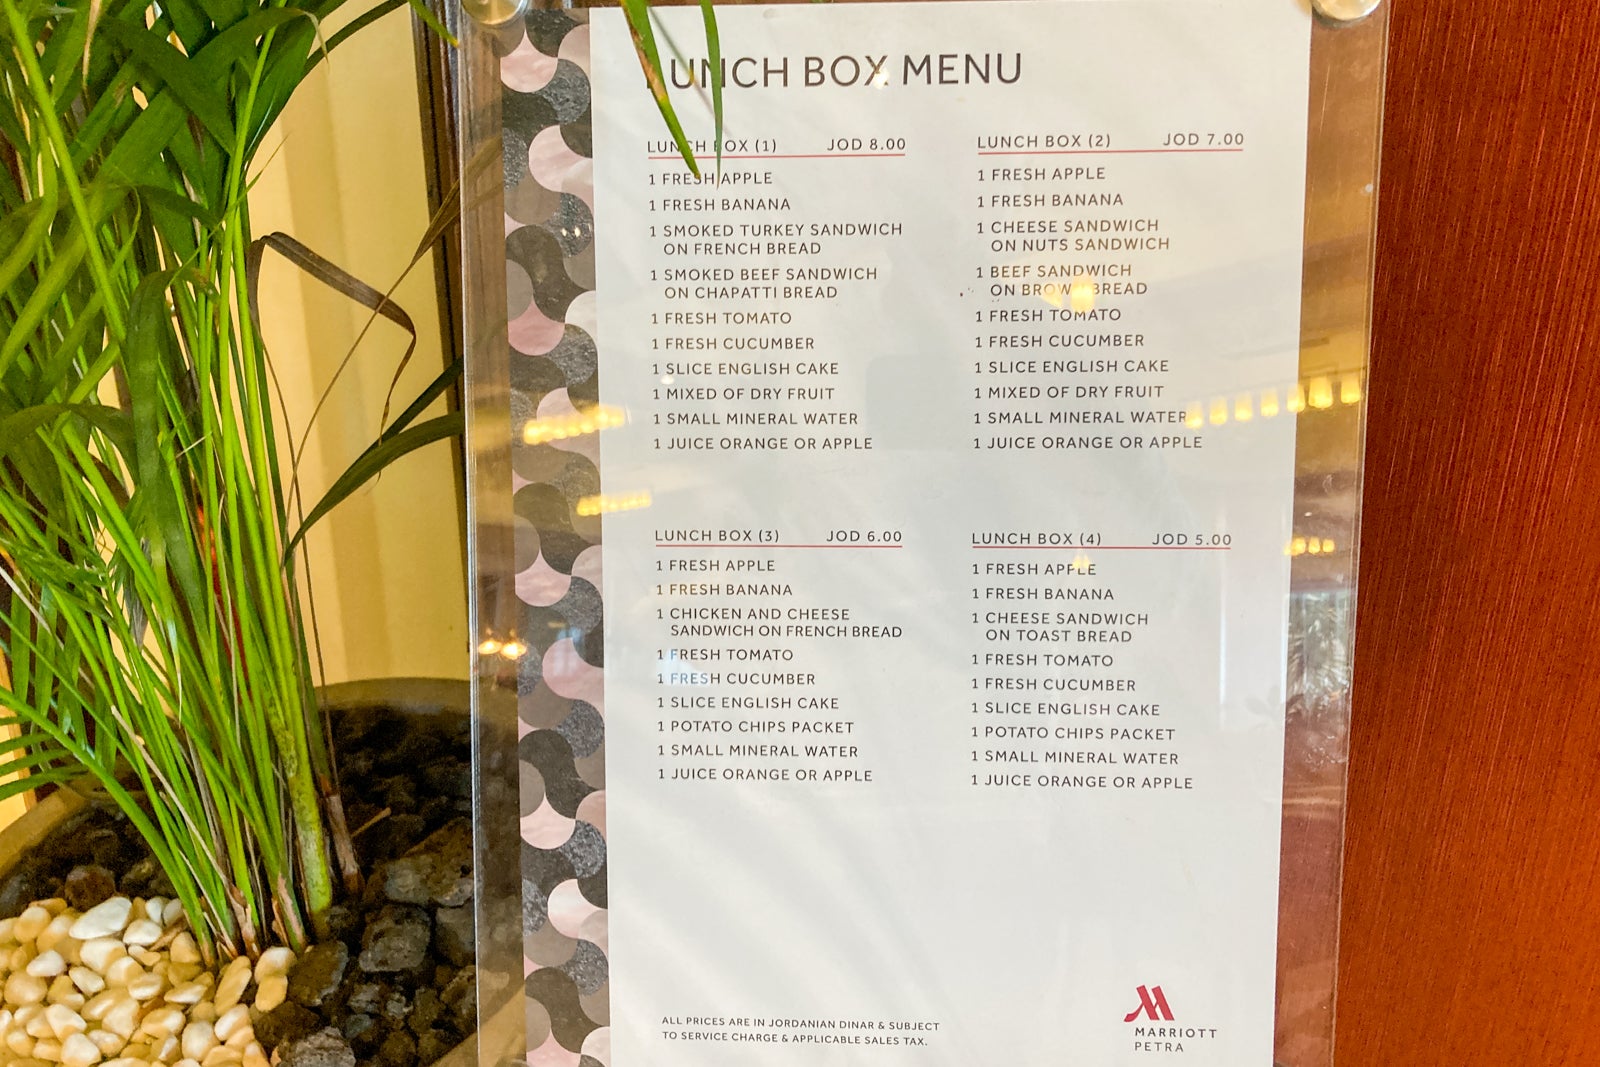 pricing for packed lunches from a hotel restaurant